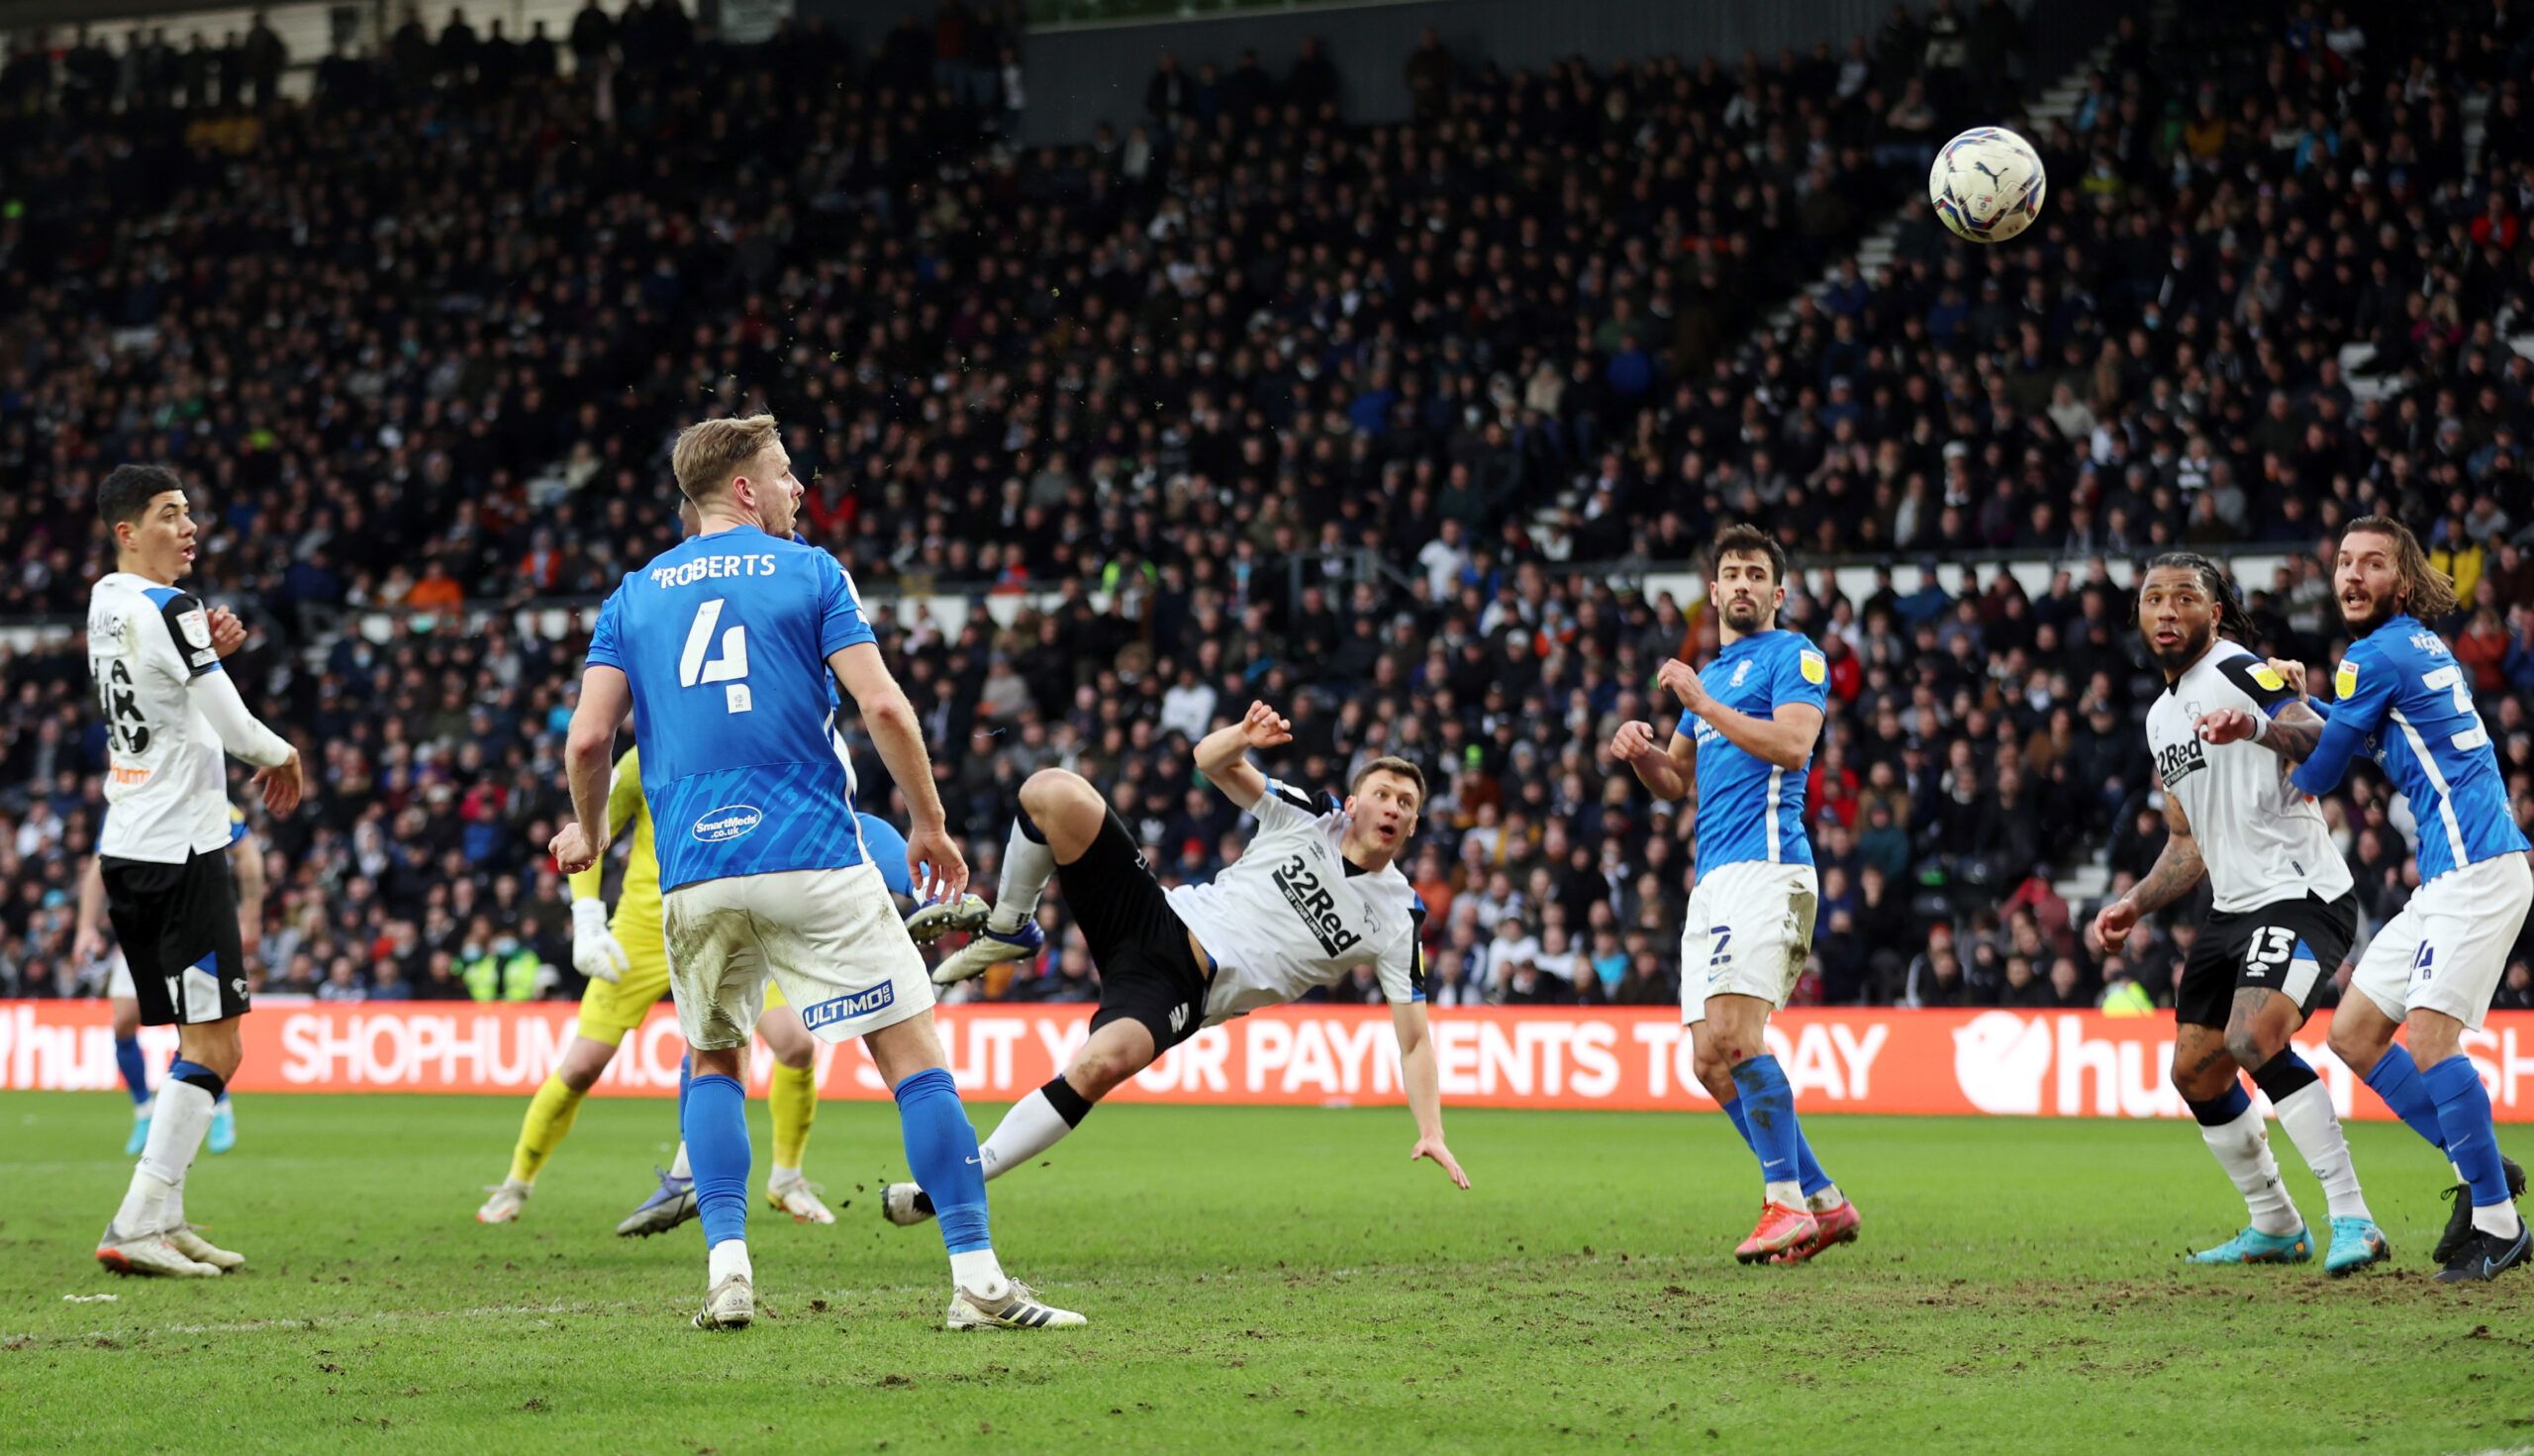 Soccer Football - Championship - Derby County v Birmingham City - Pride Park, Derby, Britain - January 30, 2022 Derby County's Krystian Bielik scoring the equalising goal Action Images/Carl Recine EDITORIAL USE ONLY. No use with unauthorized audio, video, data, fixture lists, club/league logos or 'live' services. Online in-match use limited to 75 images, no video emulation. No use in betting, games or single club /league/player publications.  Please contact your account representative for furthe